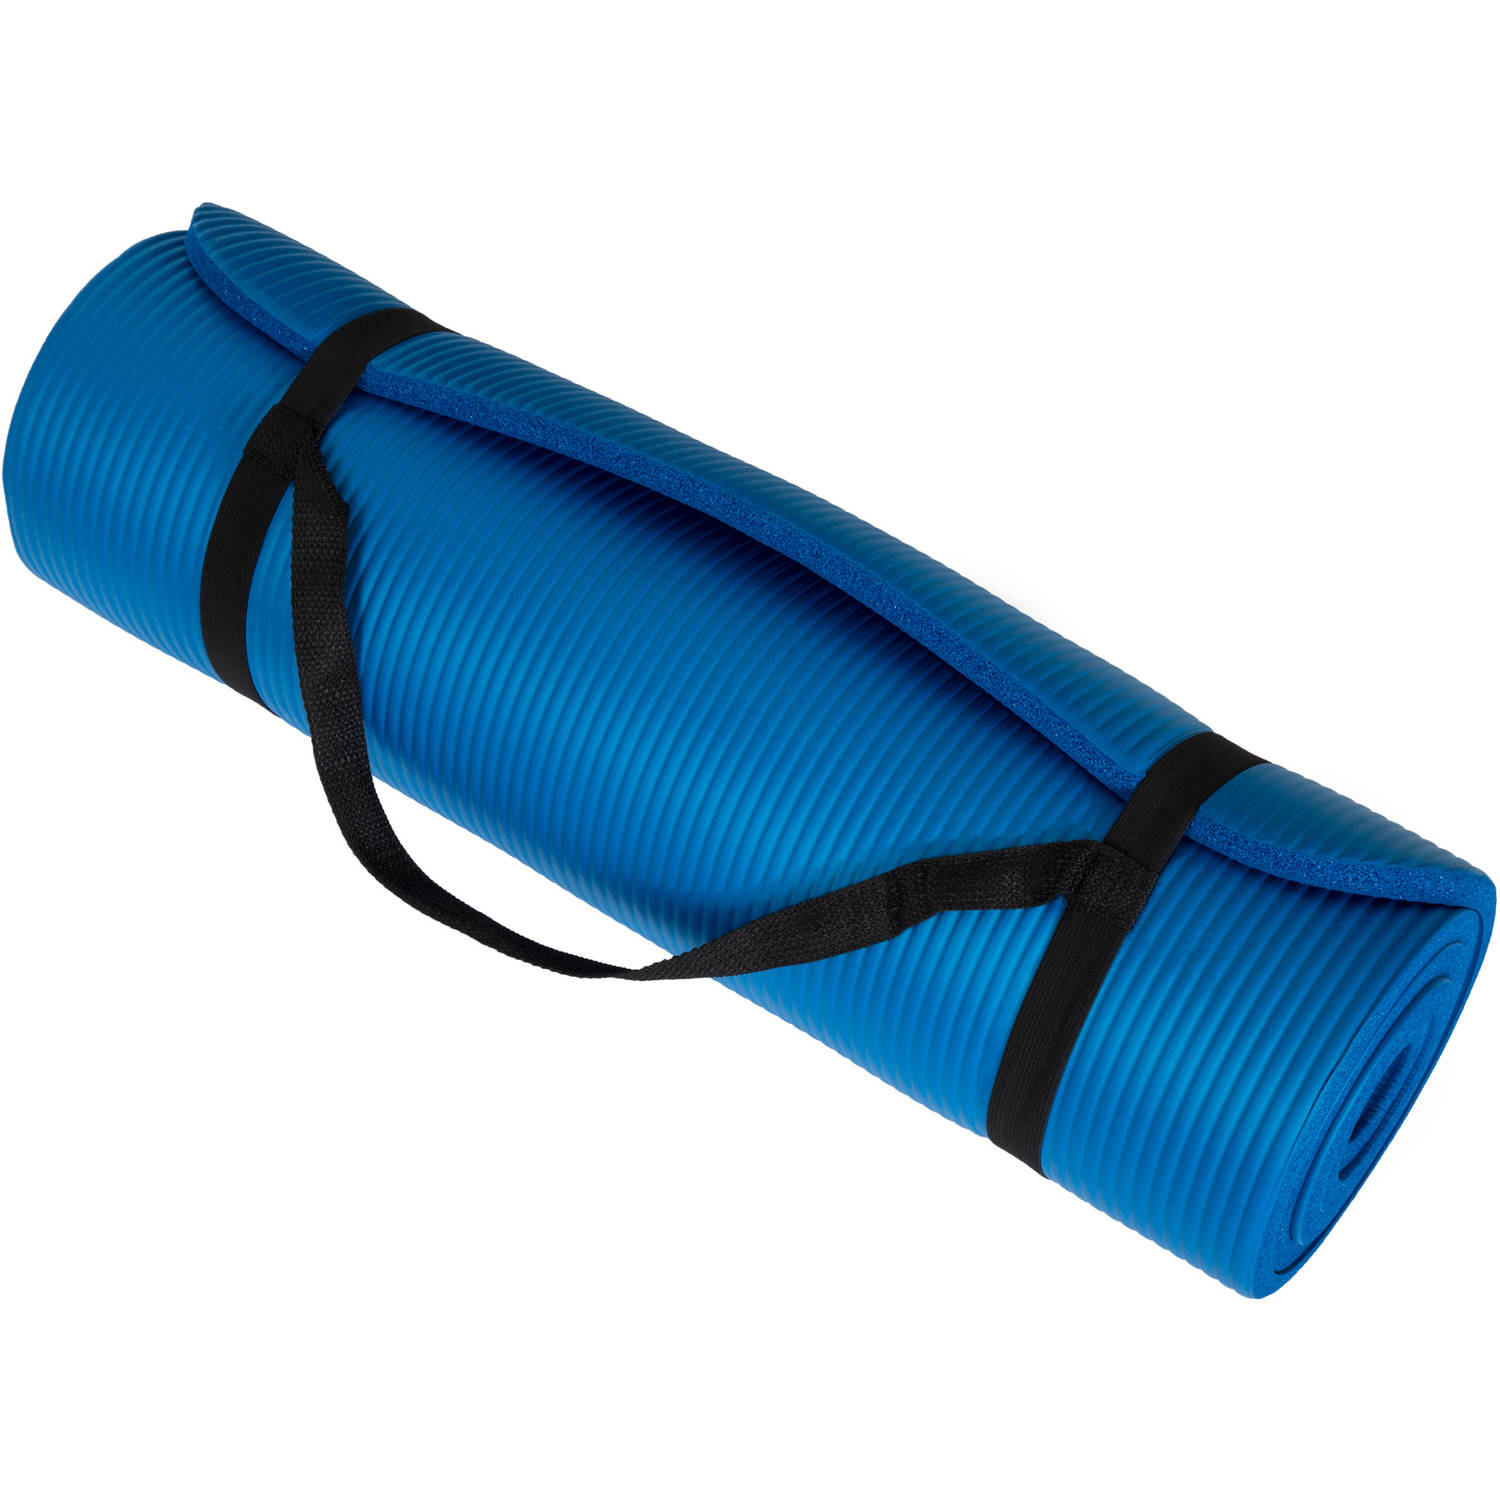 Wakeman Fitness Extra-Thick Yoga Exercise Mat, Available in Various Colors - image 1 of 6